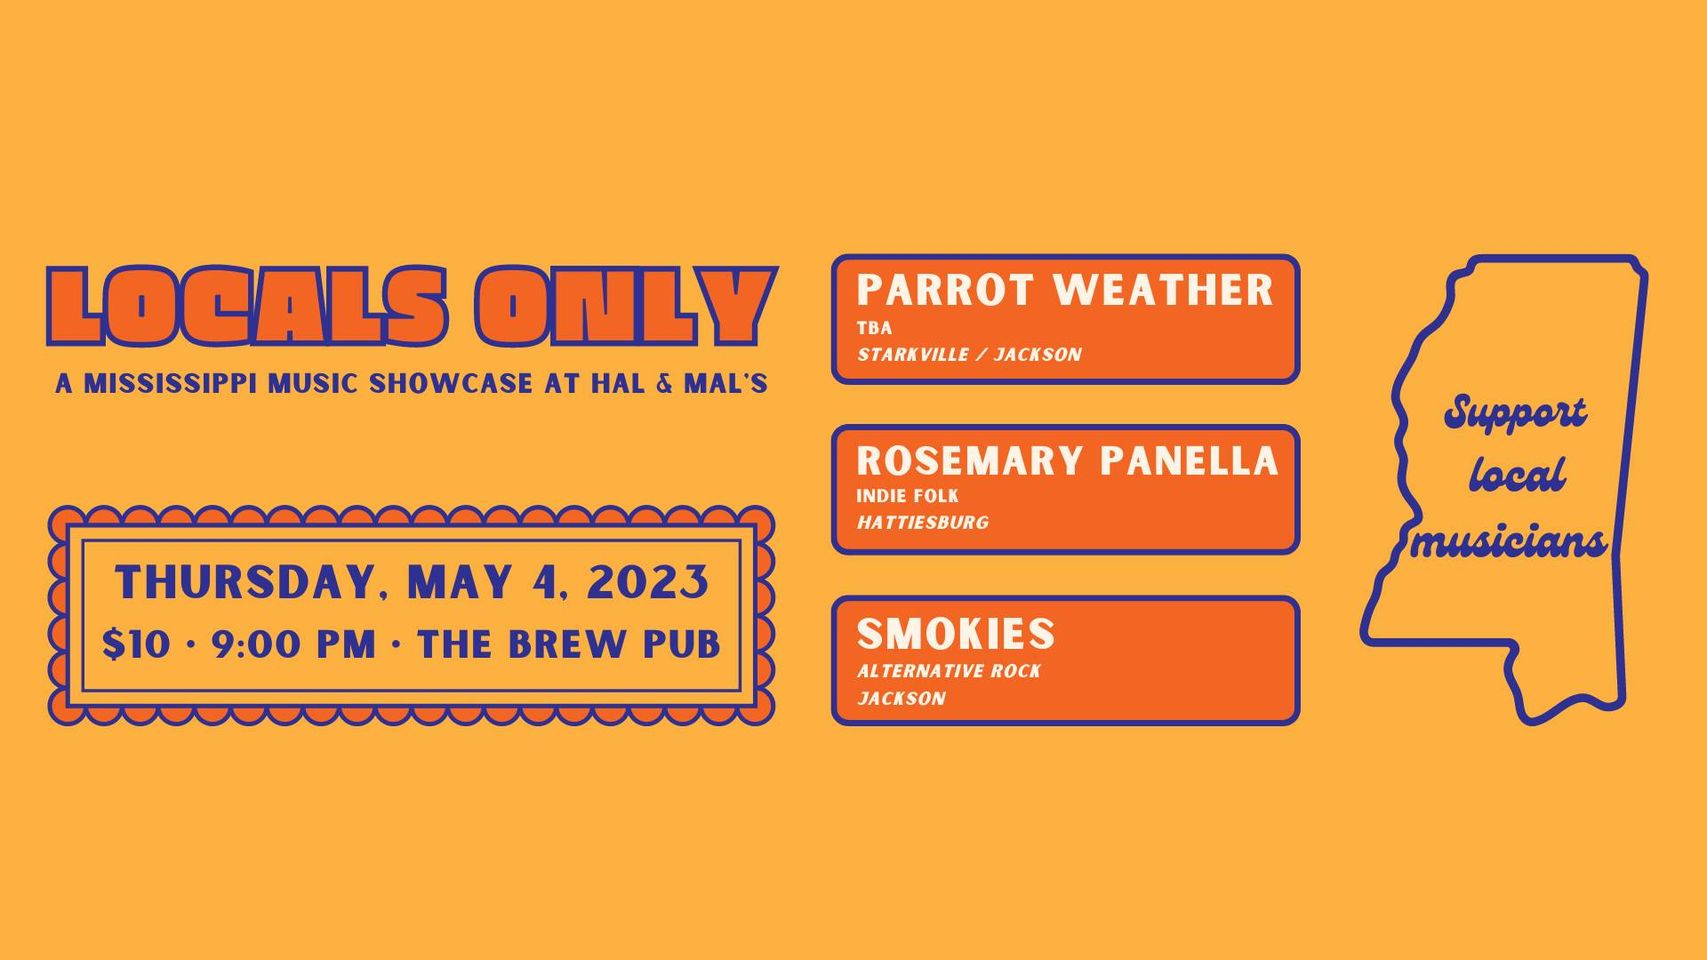 Locals Only: A Mississippi Music Showcase with Parrot Weather, Rosemary Panella, & Smokies